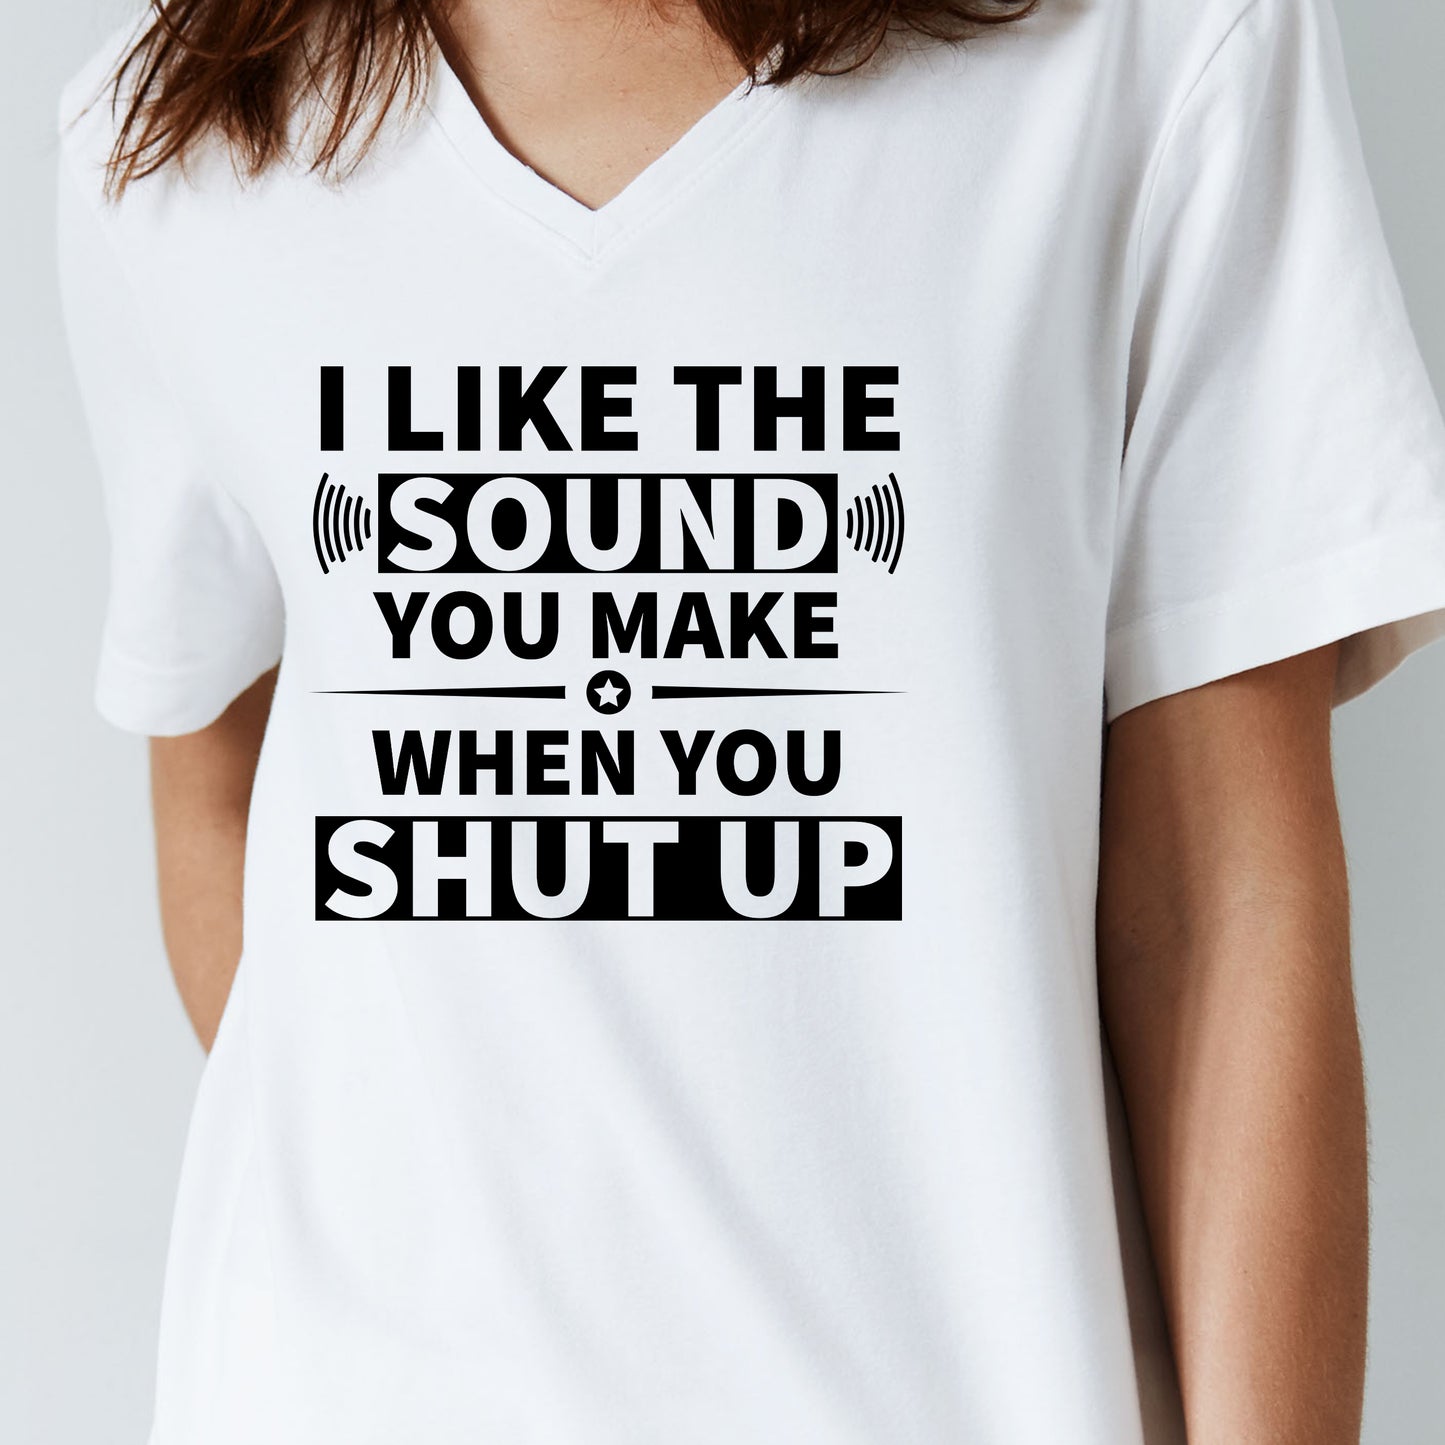 Shut Up T-Shirt For Shut Your Pie Hole TShirt For Be Quiet T Shirt For Joker Gifts For Friends For Funny Statement Shirt For Sarcastic Humor Shirt